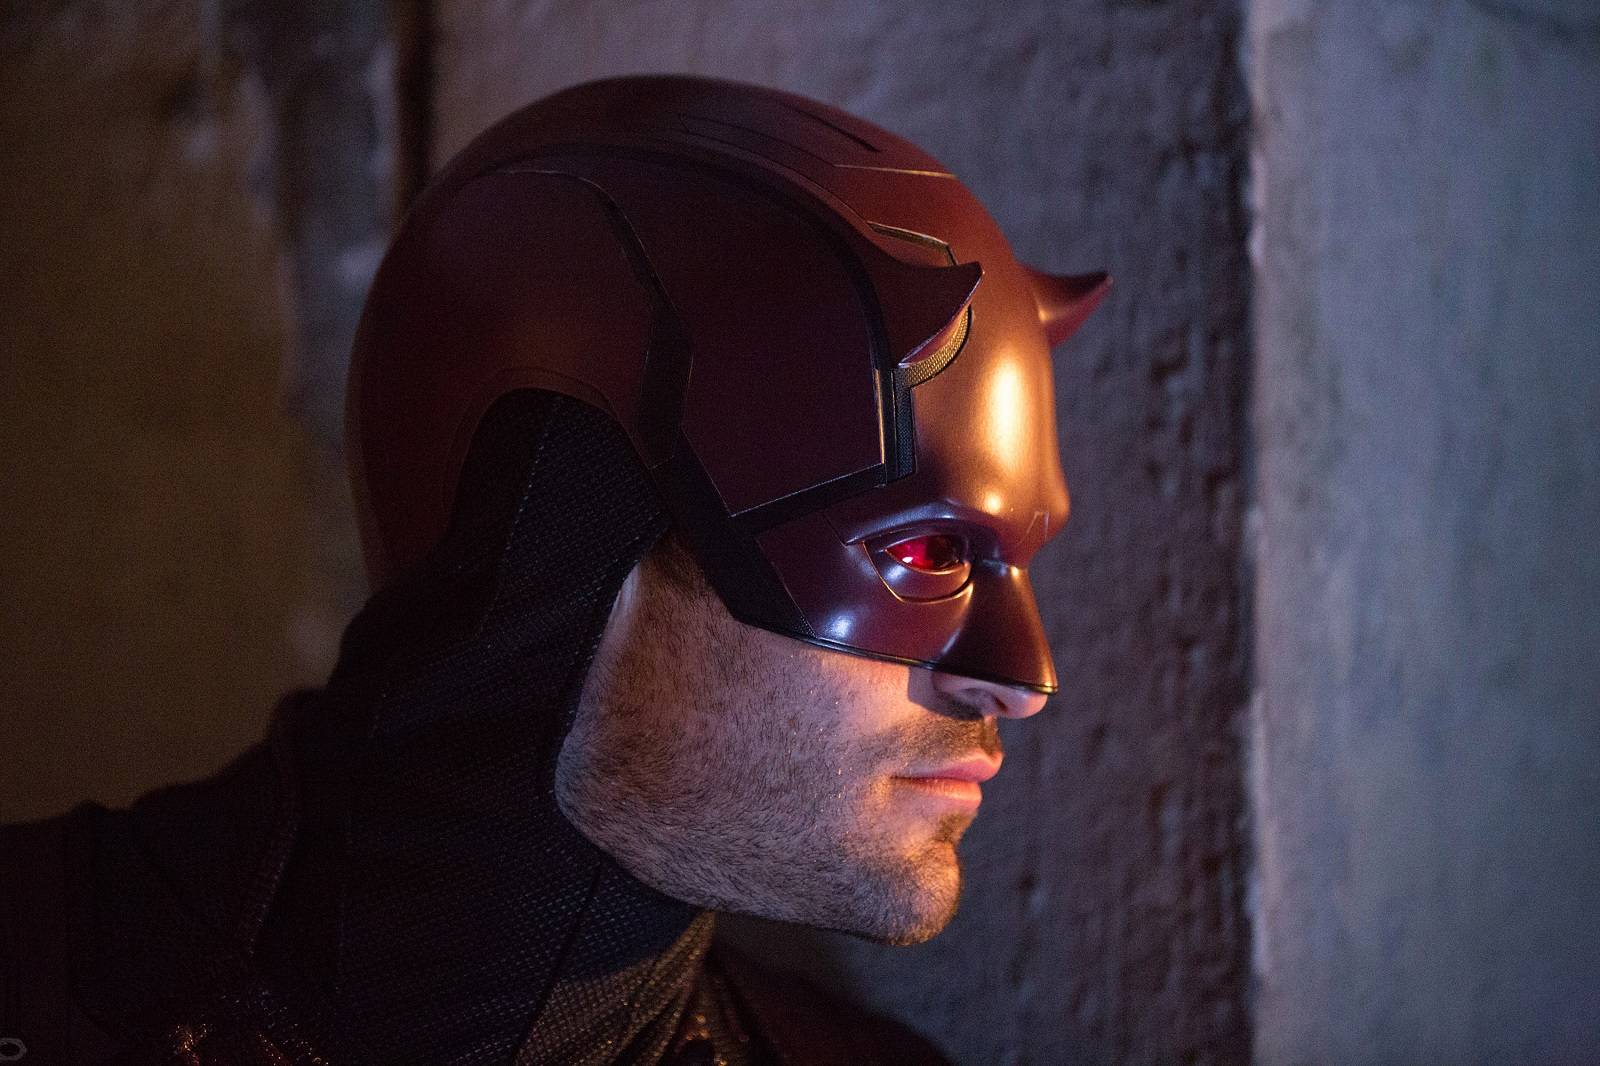 Wonder’s Daredevil is coming to the MCU, but no longer within the trend you think